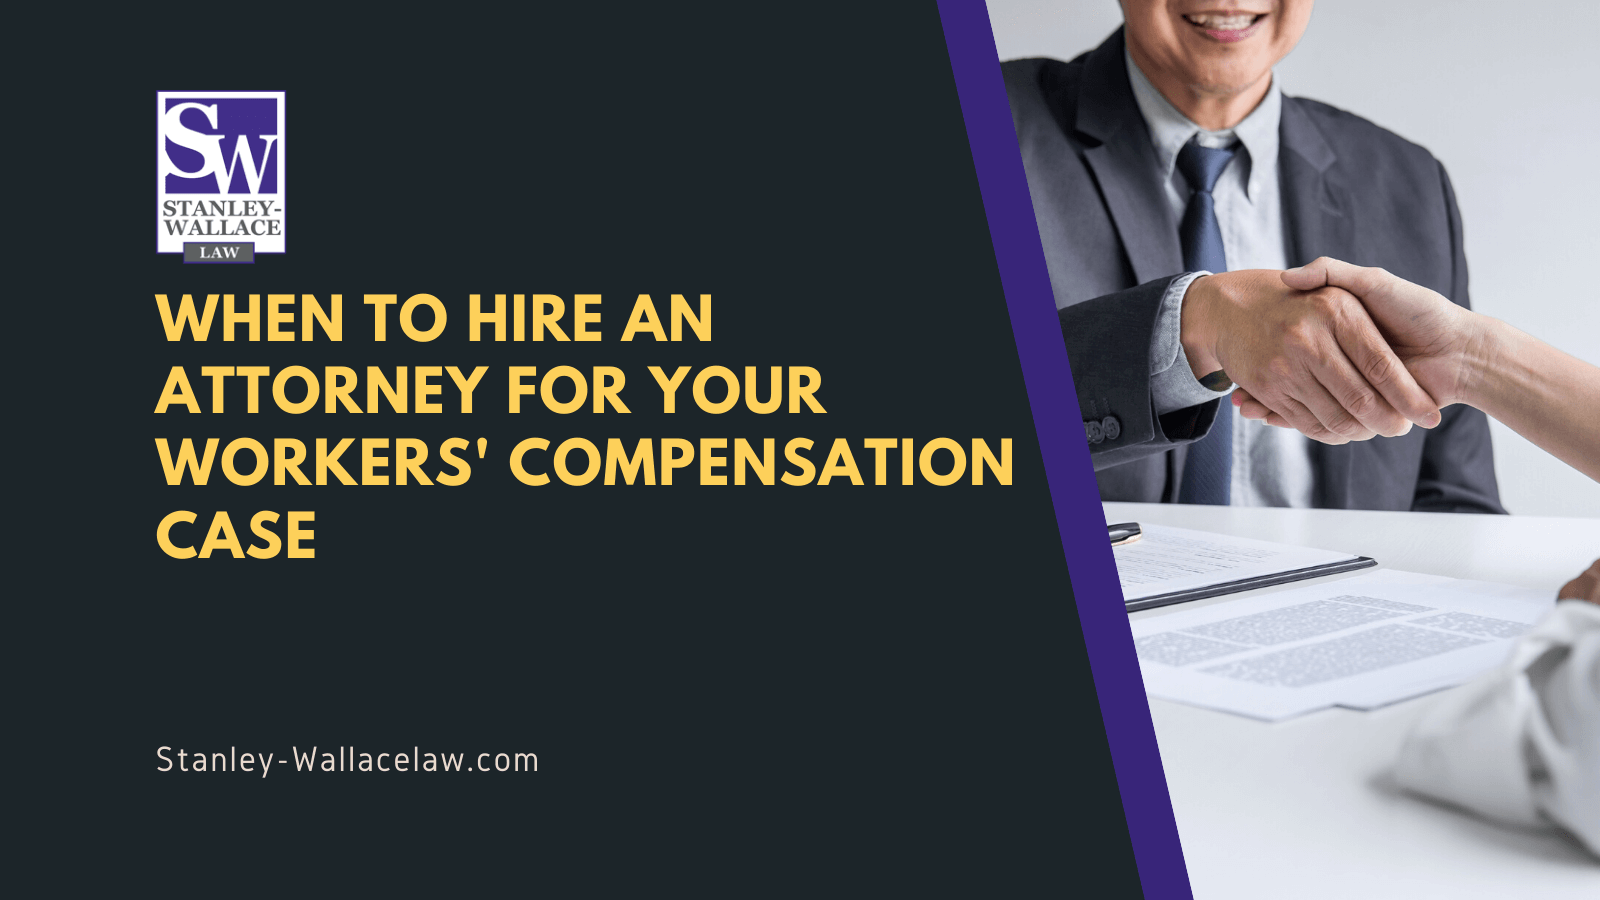 When to Hire an Attorney for your Workers' Compensation Case - Stanley-Wallace Law - slidell louisiana